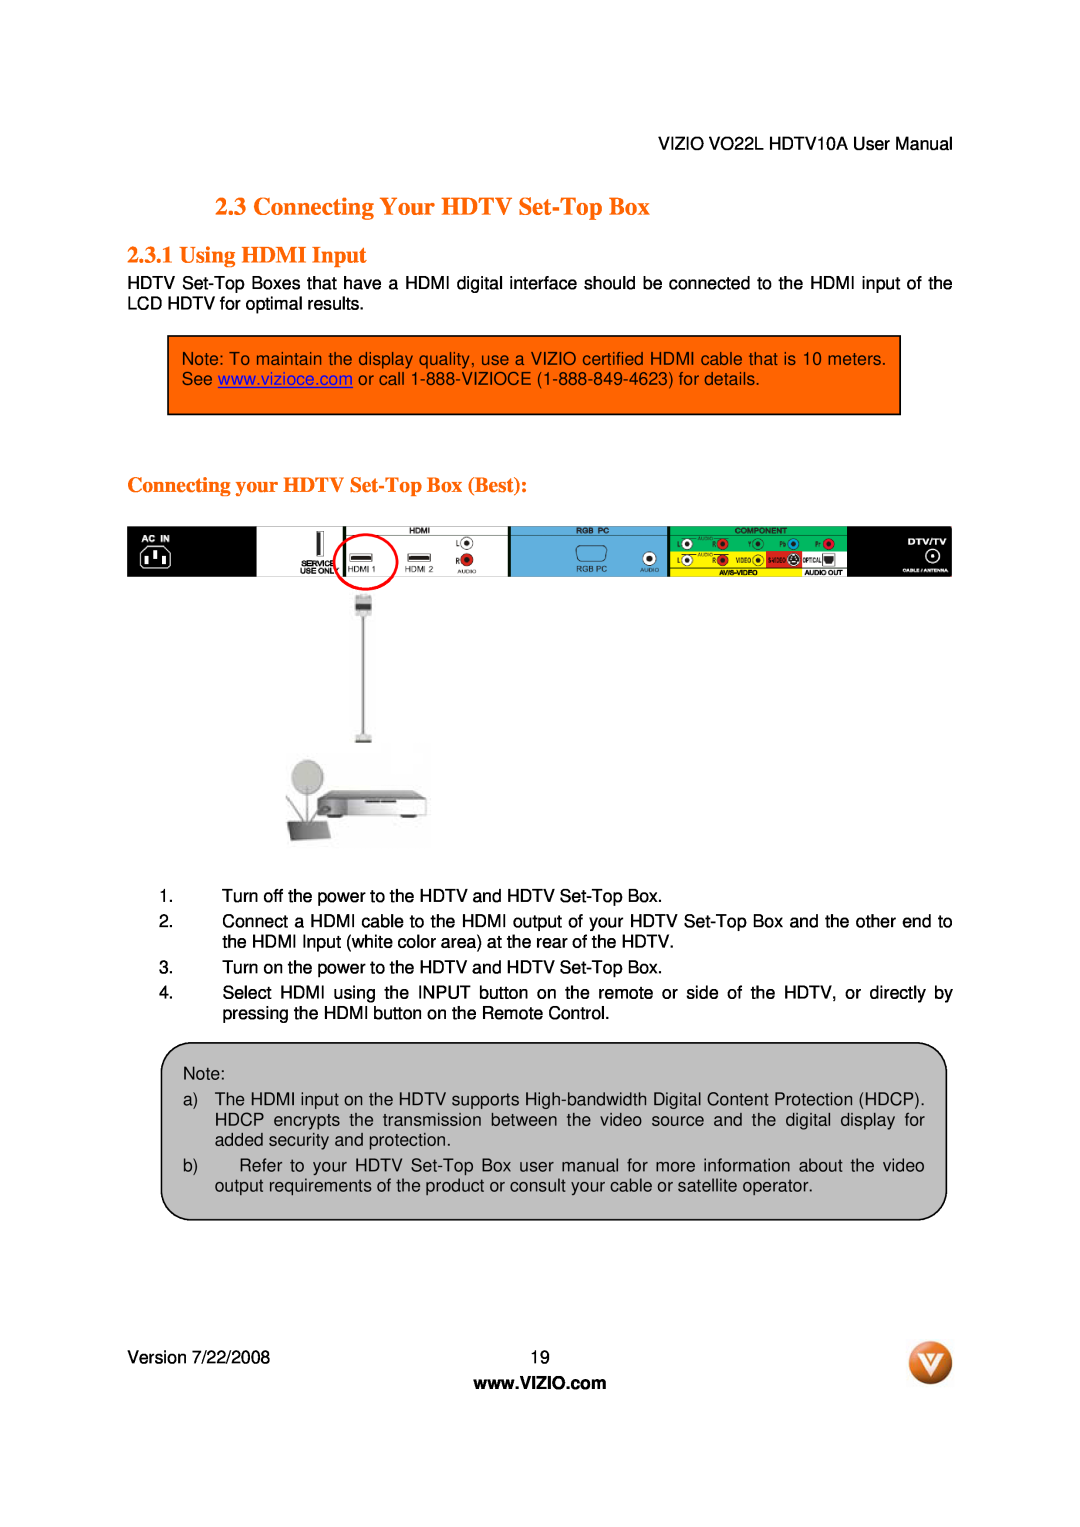 Vizio VO22L user manual Connecting Your HDTV Set-Top Box, Using HDMI Input, Connecting your HDTV Set-Top Box Best 